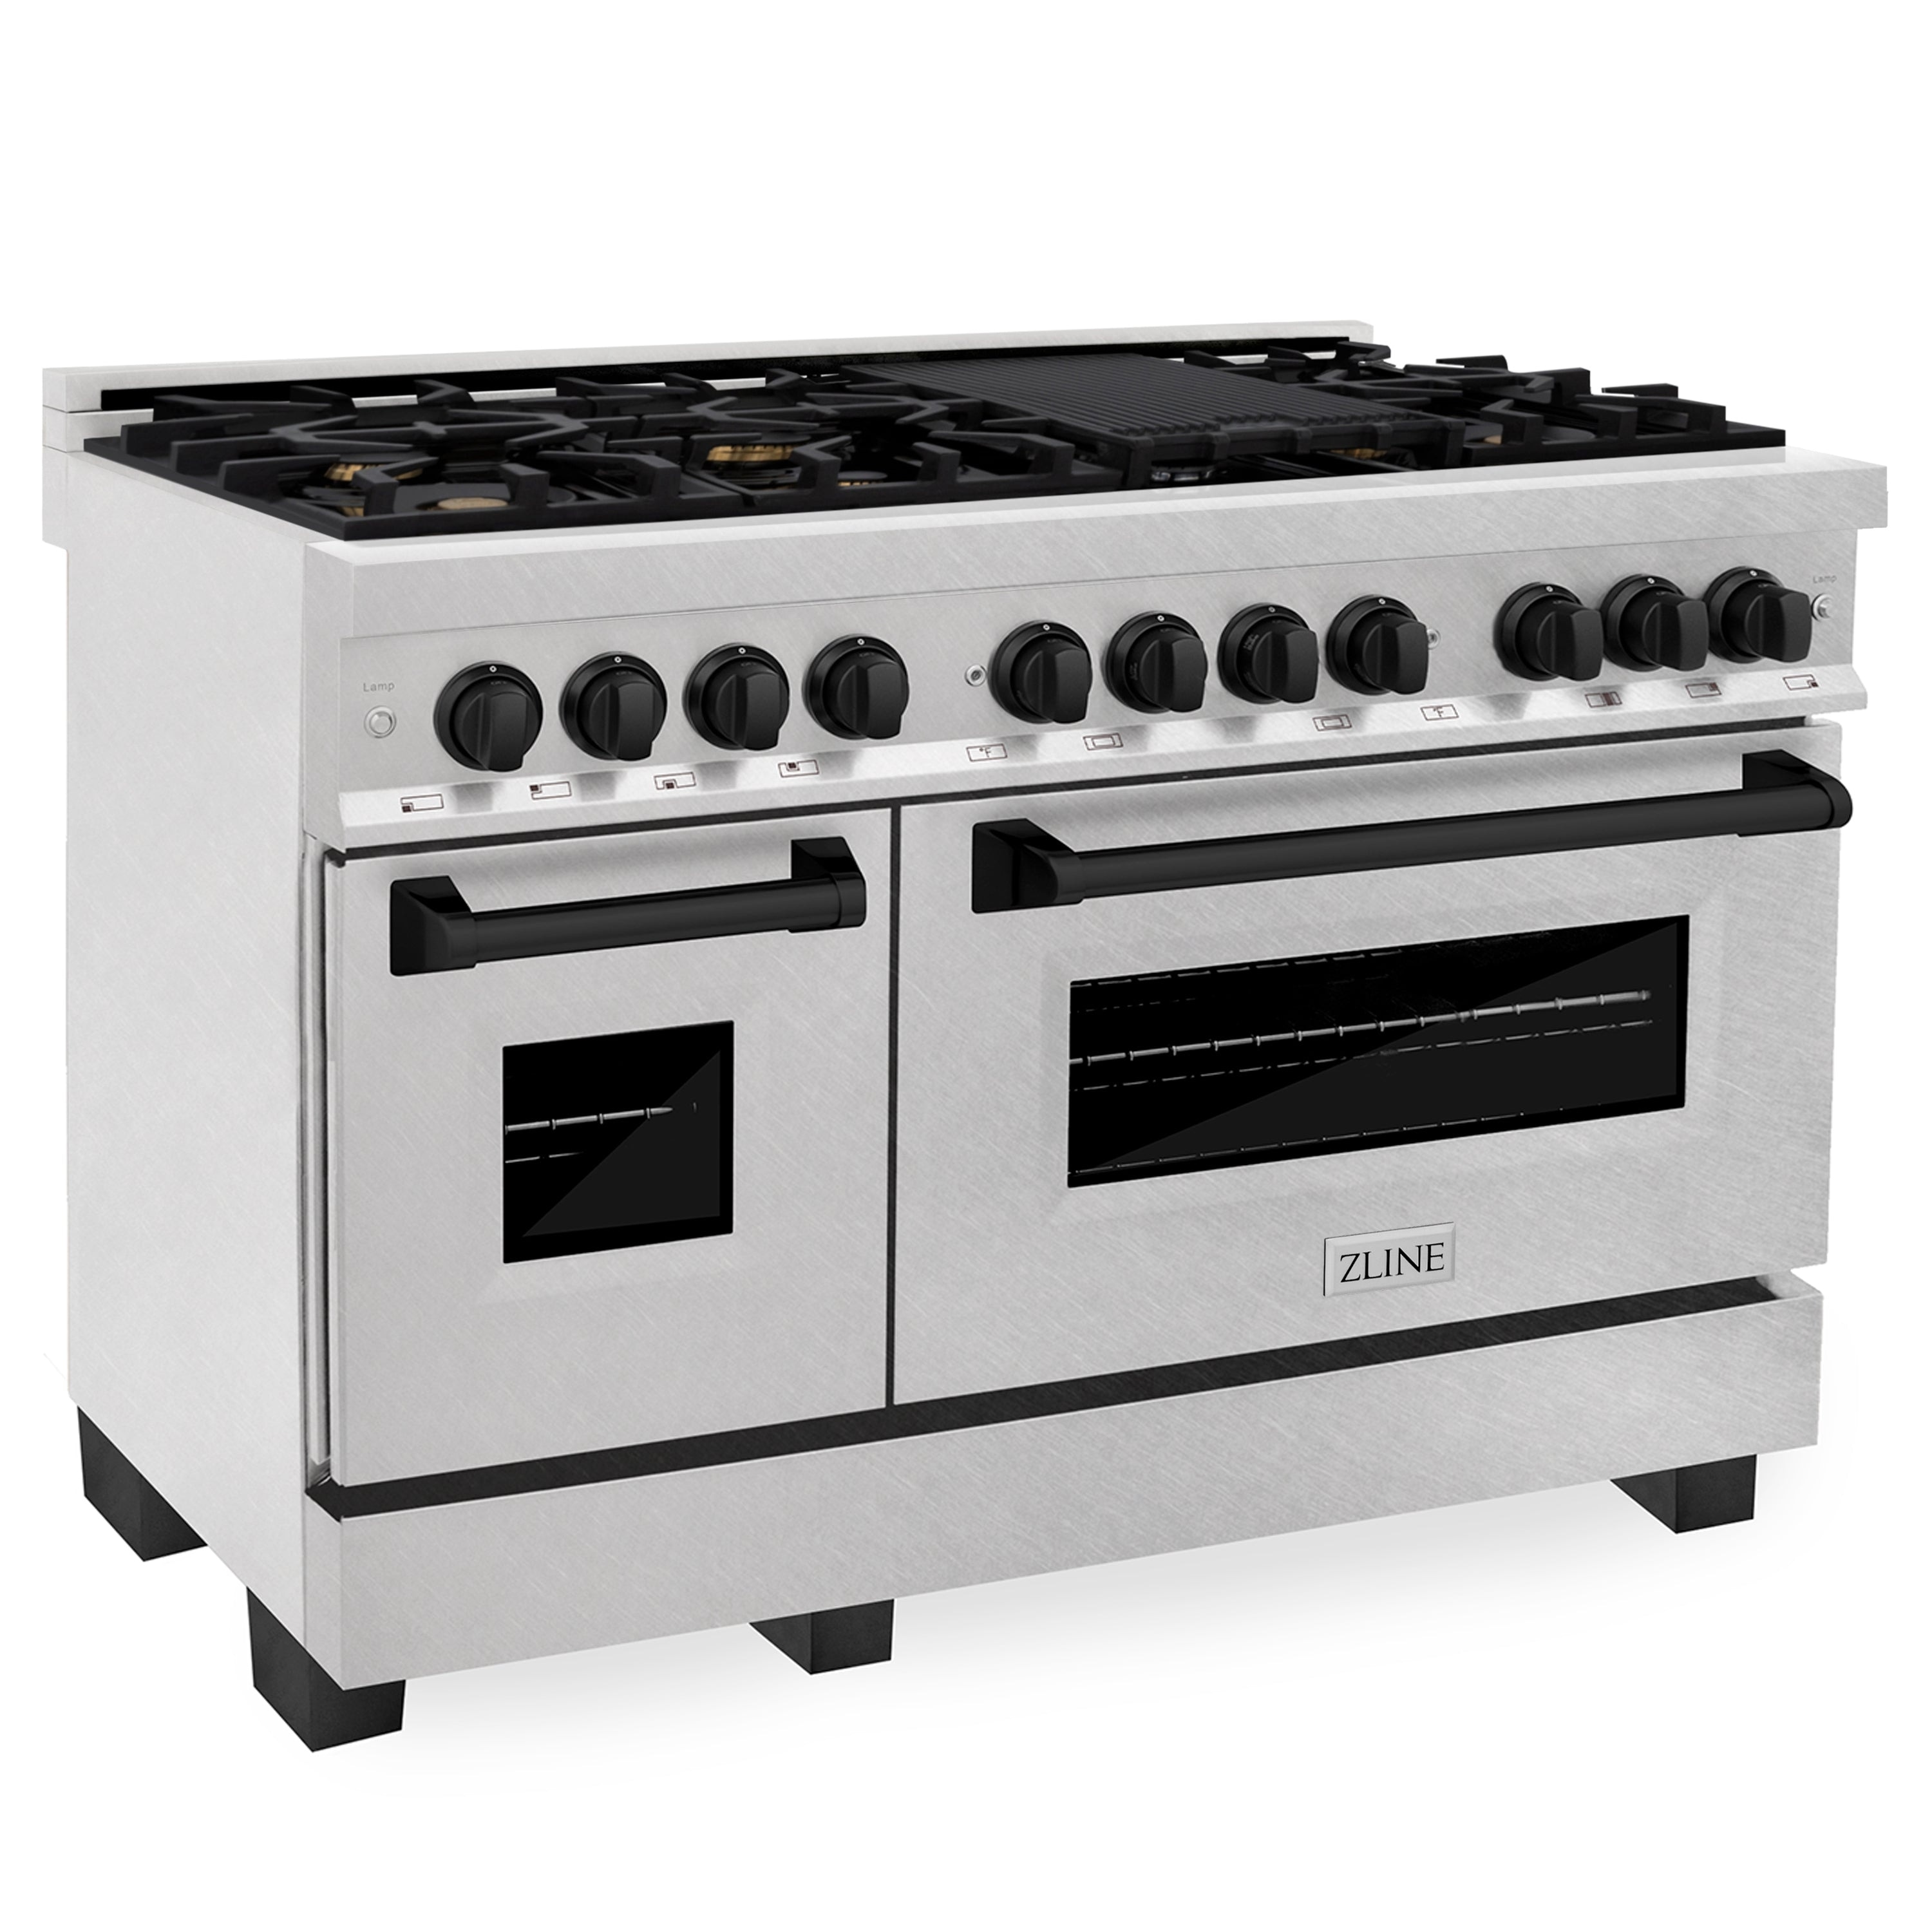 Zline Kitchen and Bath Autograph Edition 48" 6.0 cu. ft. Dual Fuel Range with Gas Stove and Electric Oven in Fingerprint Resistant Stainless Steel